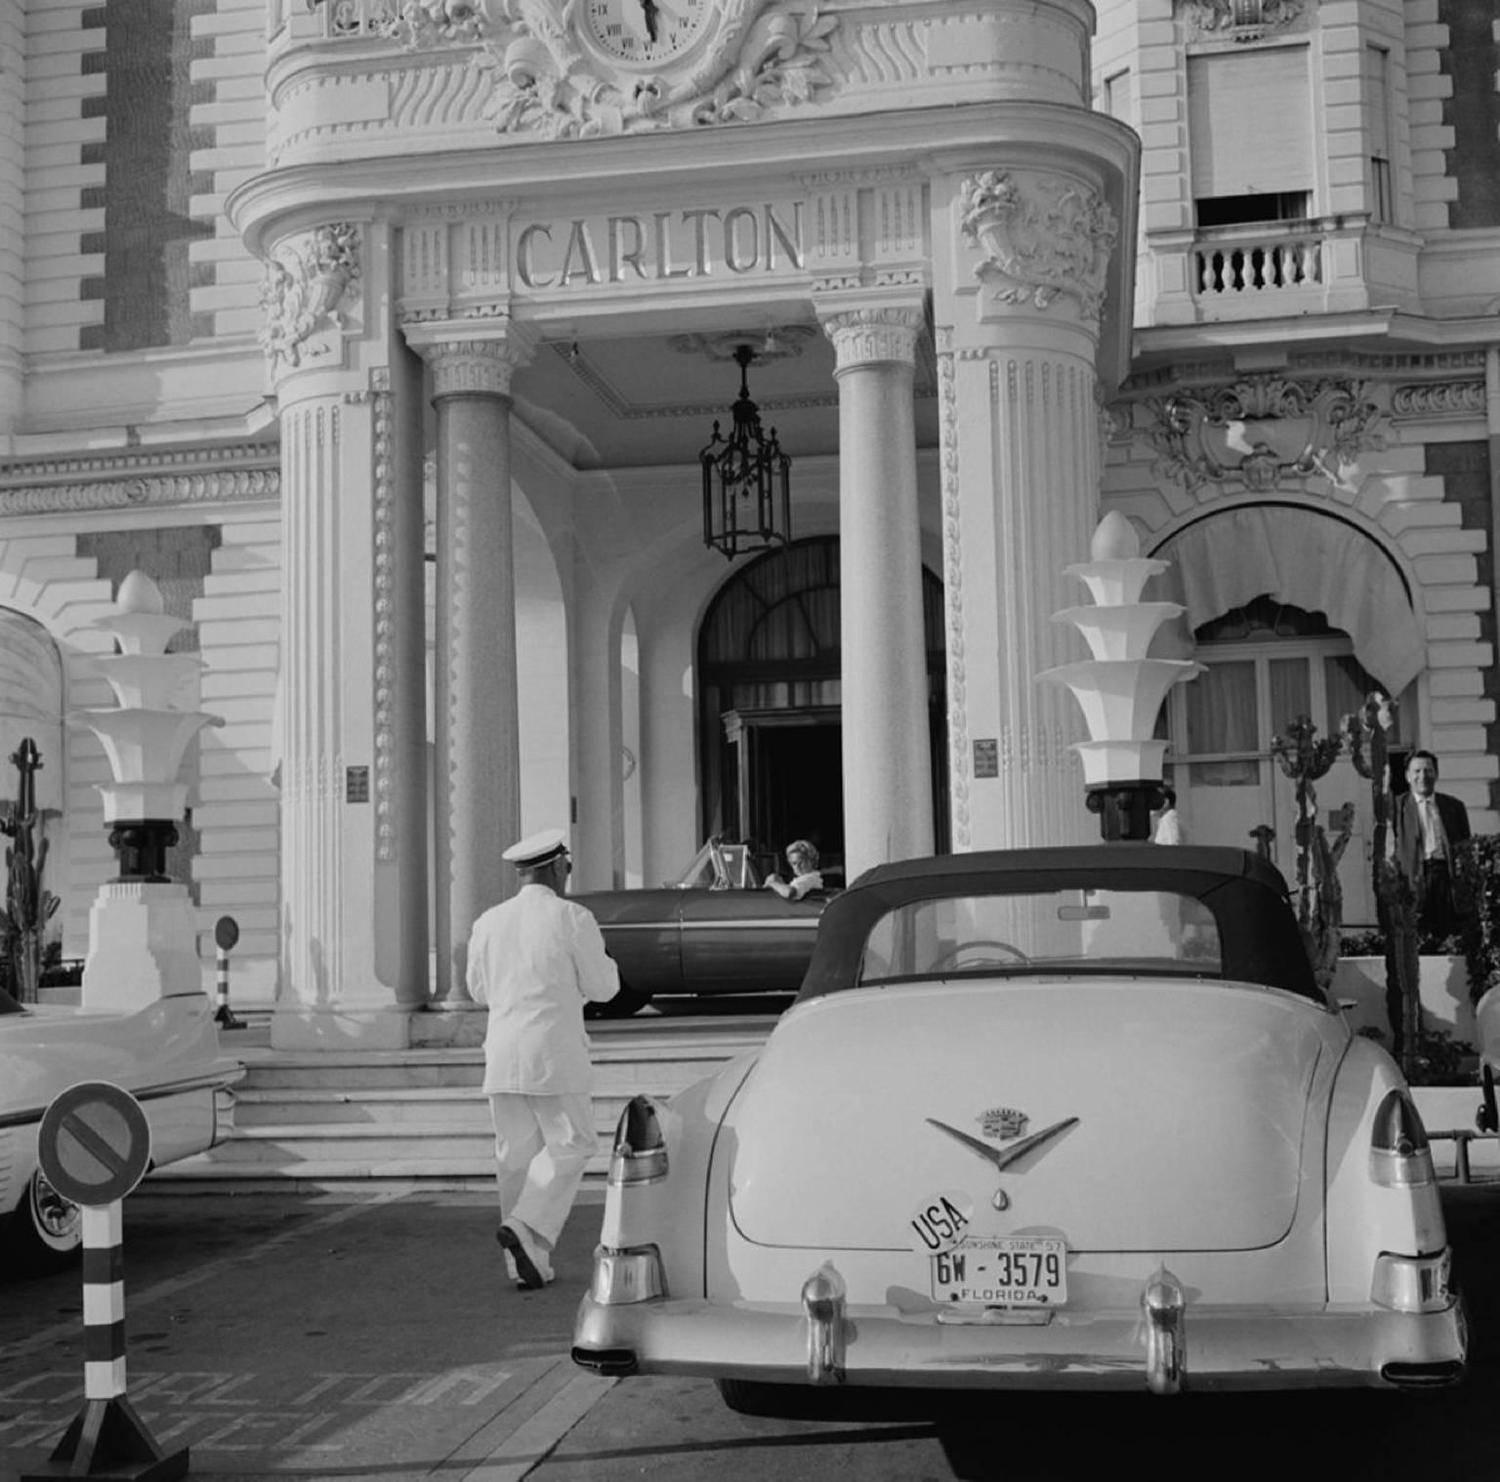 A Cadillac with Florida plates parked outside the Carlton Hotel, Cannes, France, circa 1955.

Estate stamped and hand numbered edition of 150 with certificate of authenticity from the estate.   

Slim Aarons (1916-2006) worked mainly for society